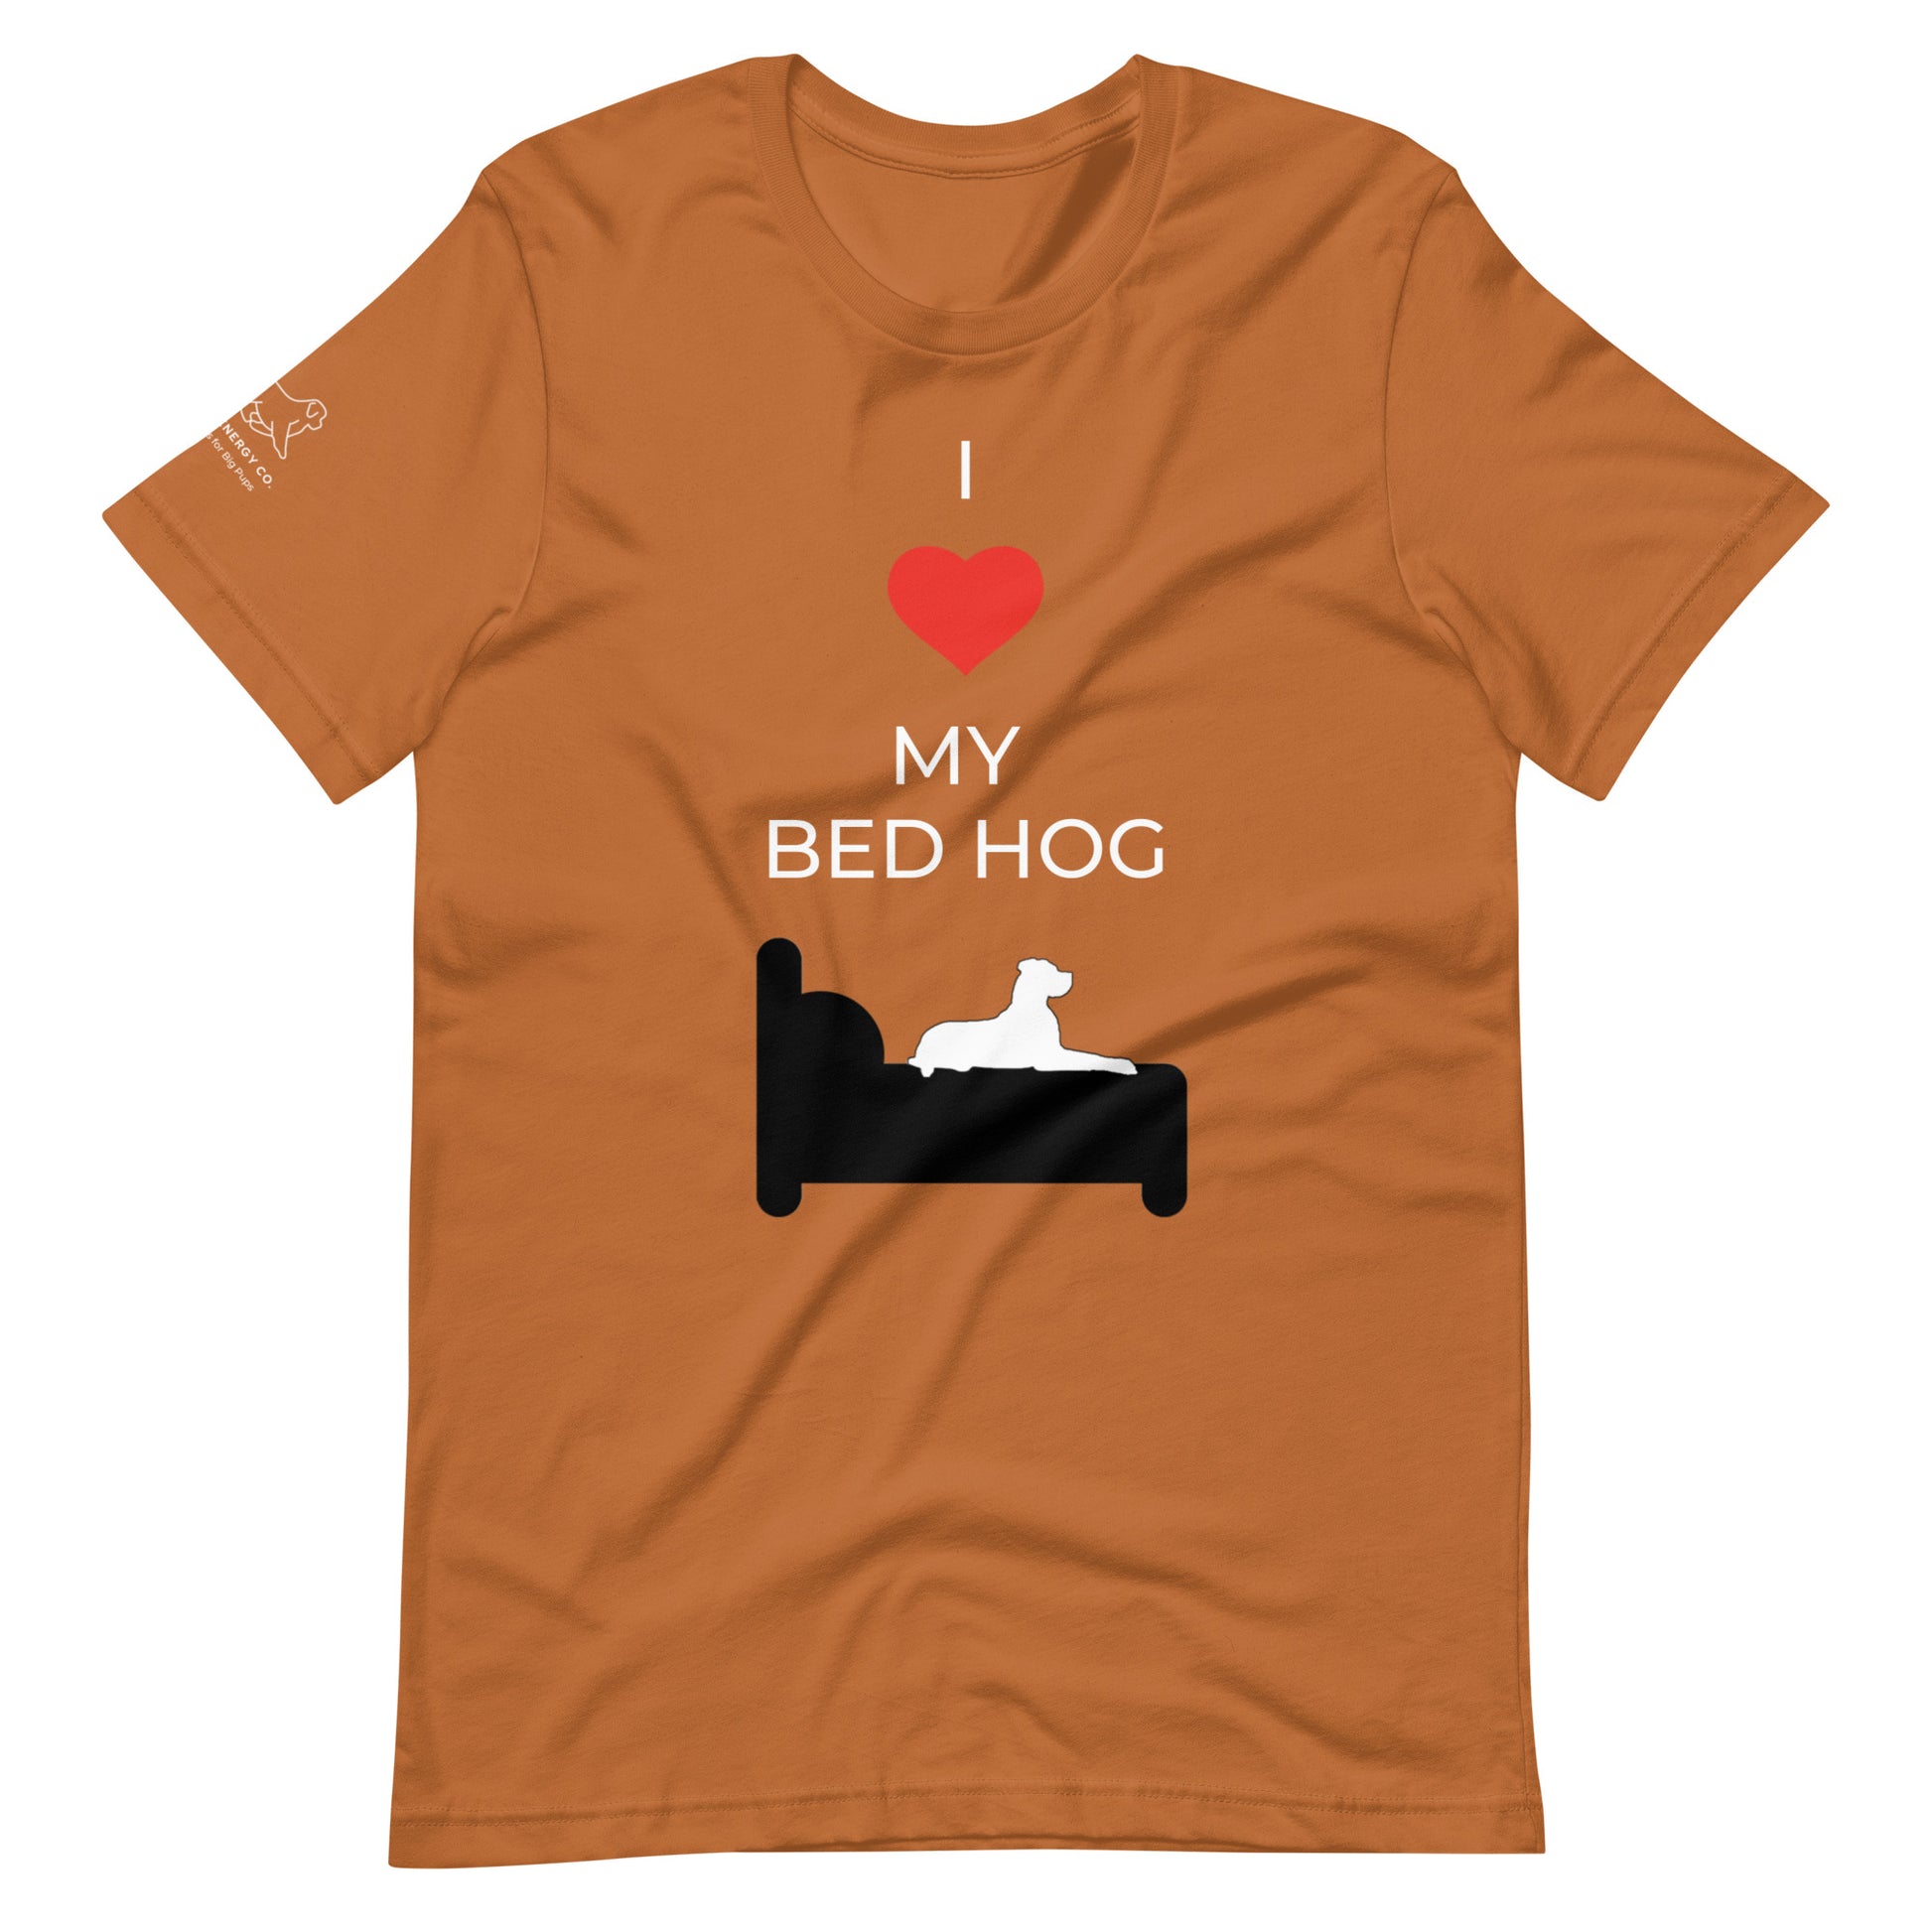 Front of a toast orange t-shirt that reads "I love my bed hog" in white text over an illustration that is the white silhouette of a large dog laying on the dark silhouette of a bed. The word "love" is replaced by a red heart symbol.